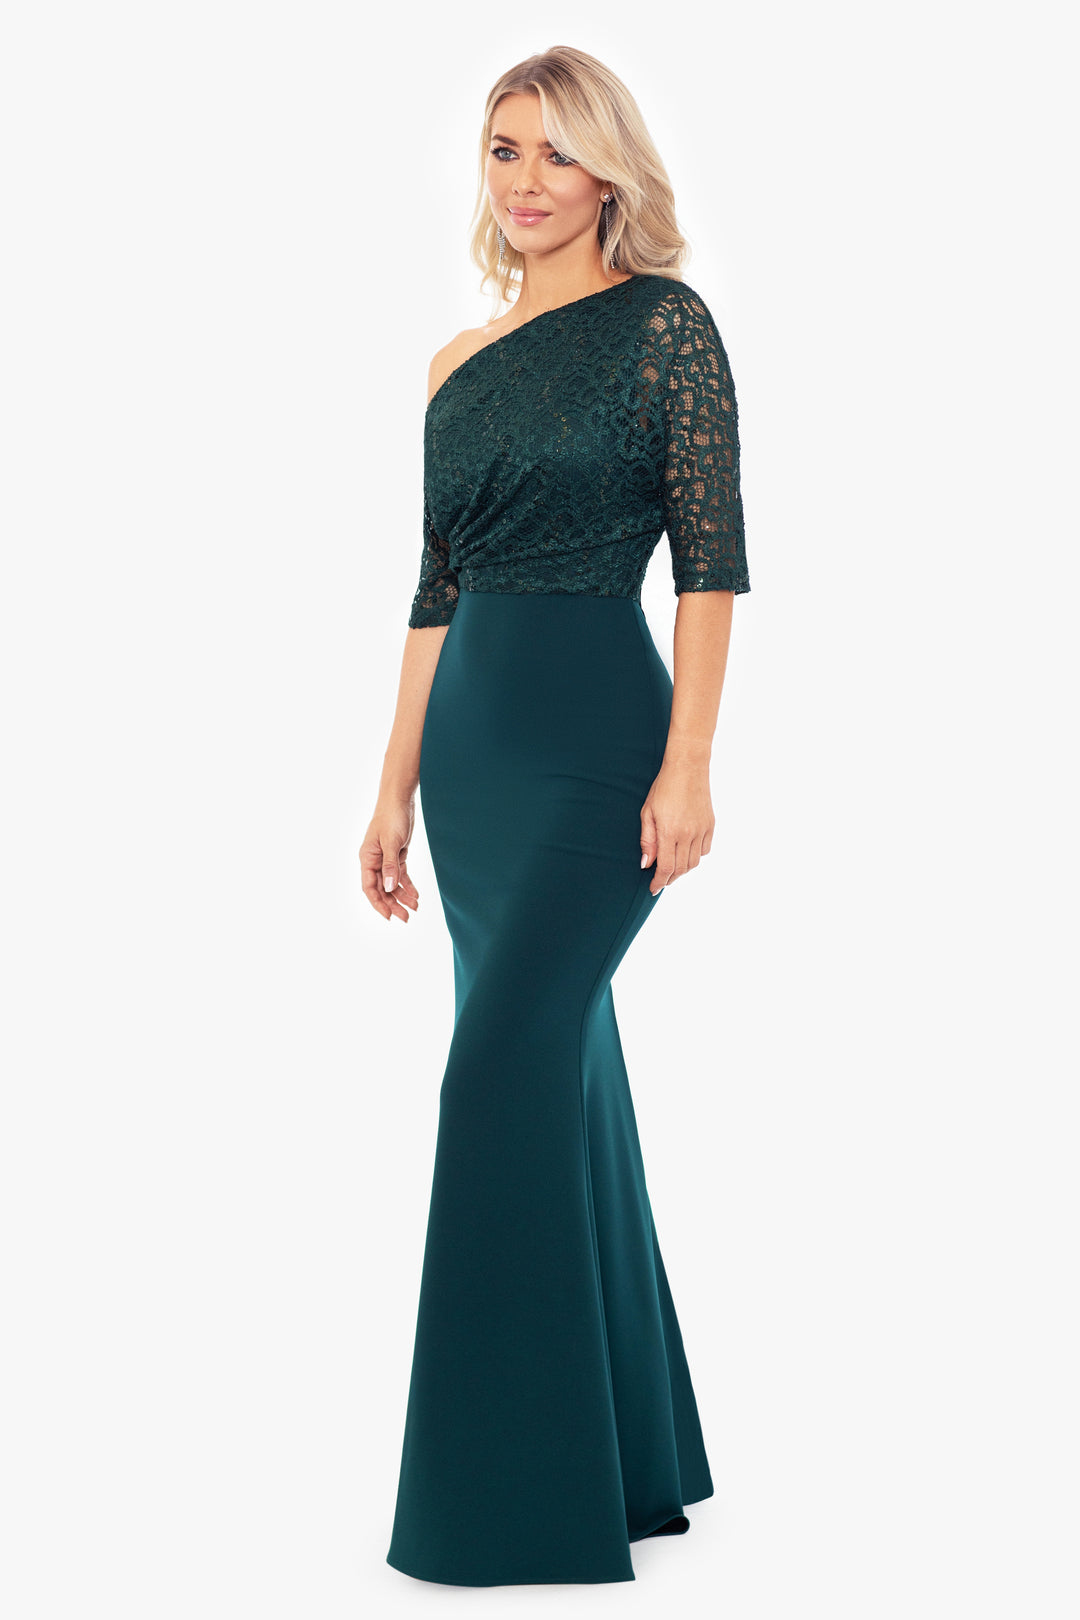 "Pippa" Lace Top with Scuba Crepe Skirt Long Dress